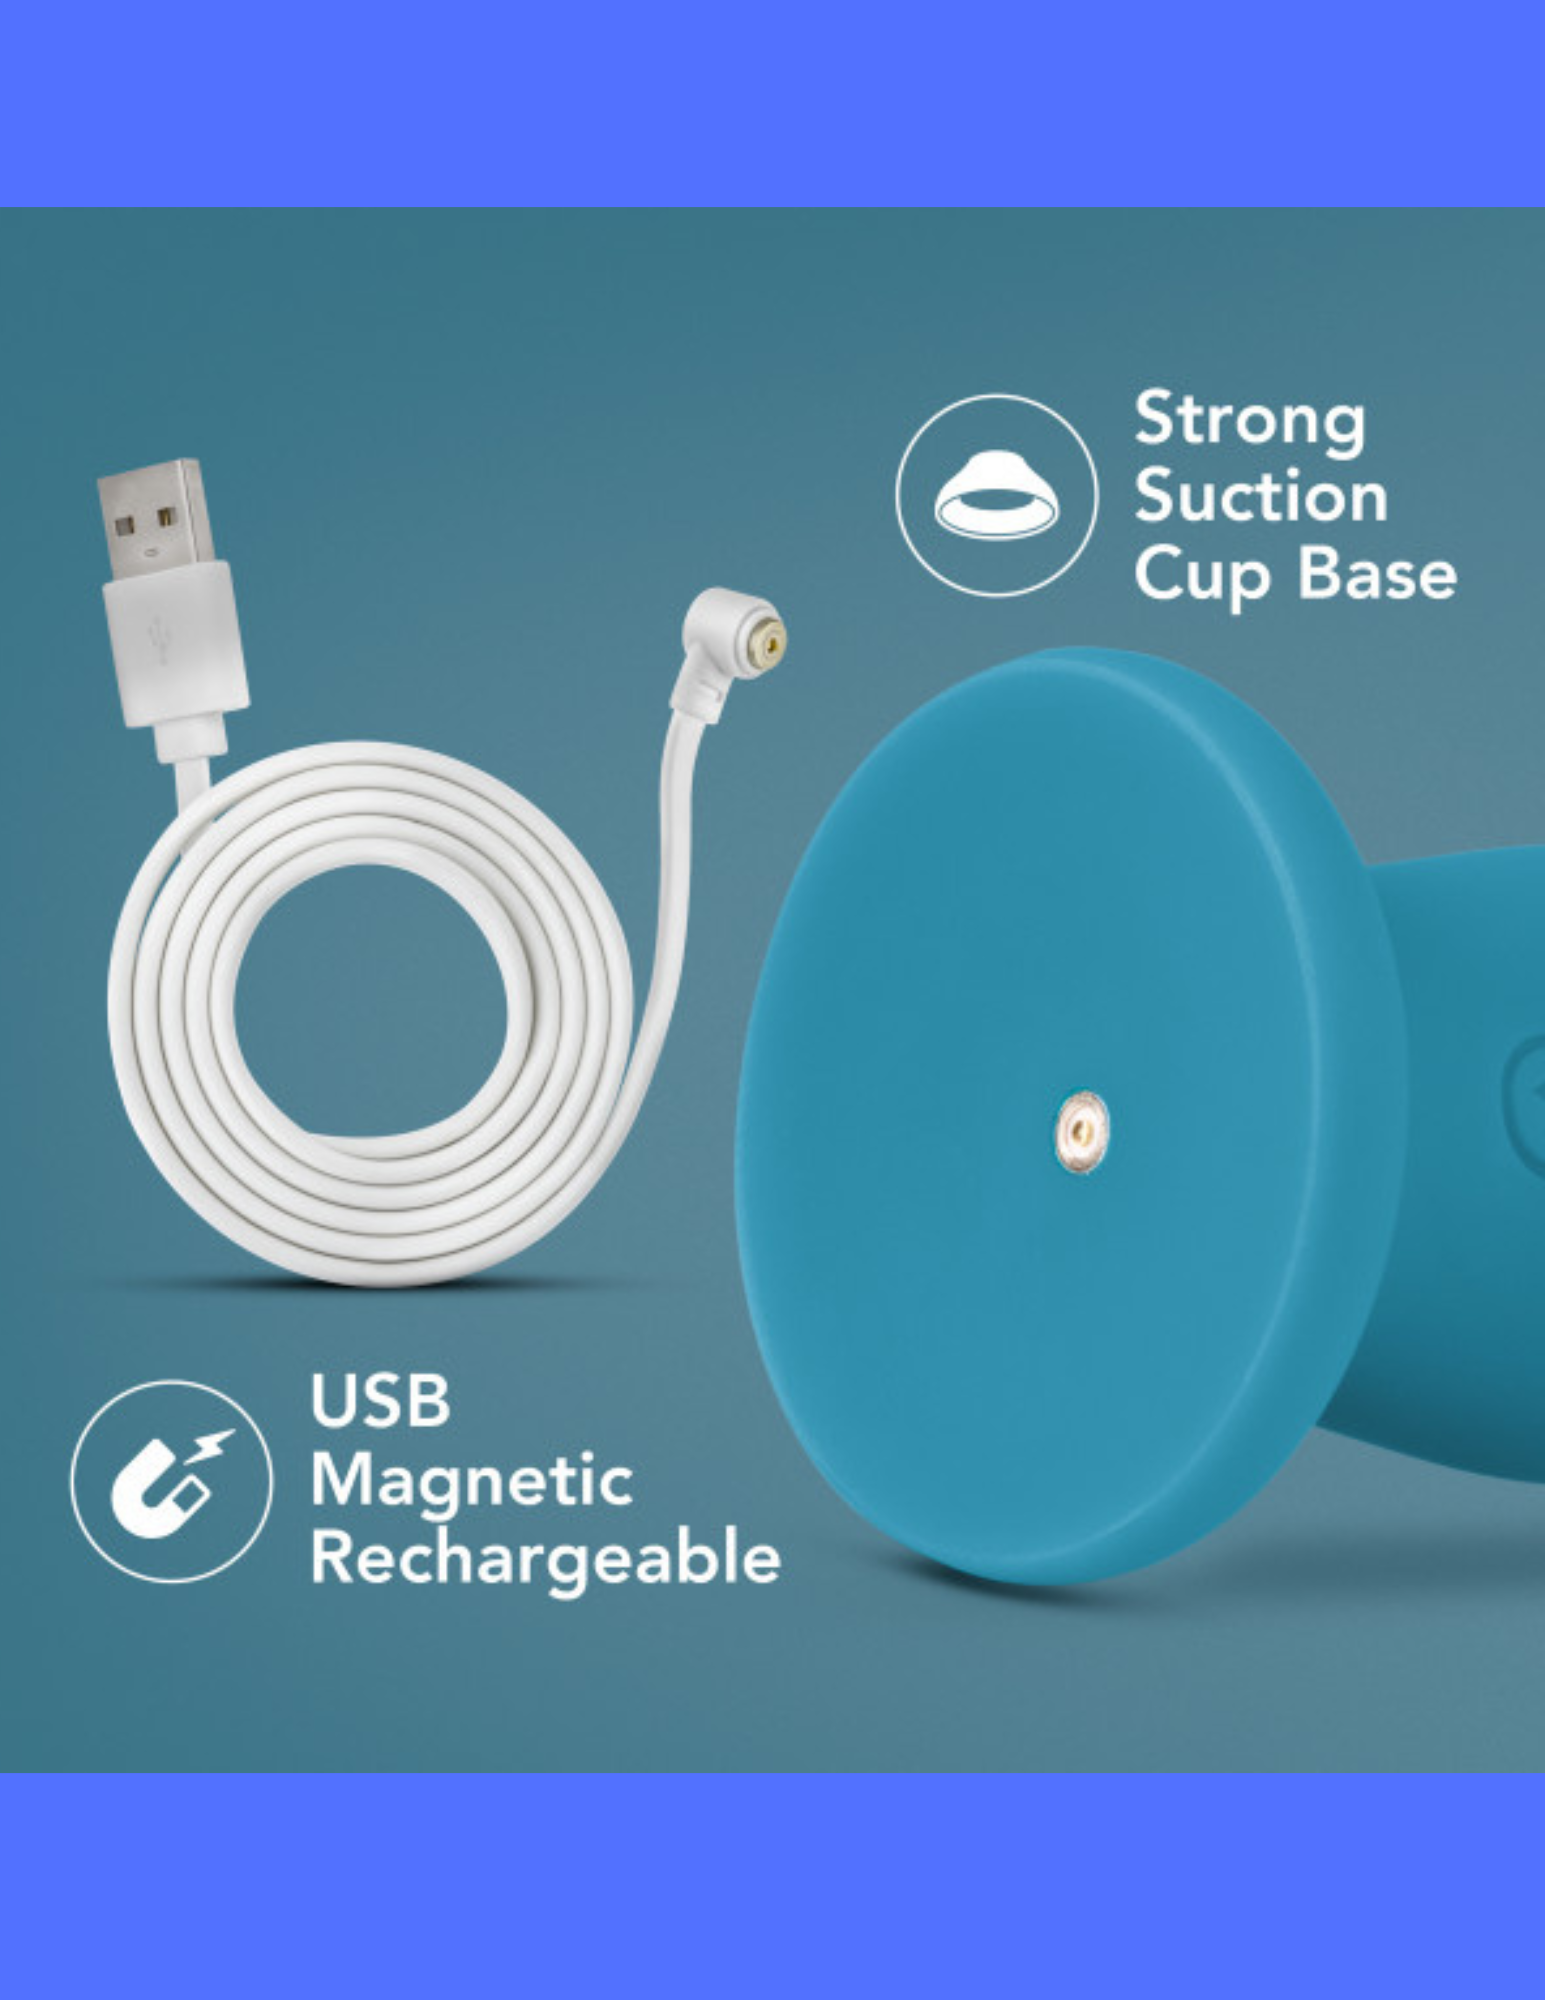 Image shows the magnetic USB charging cord and port of the Impressions Miami Vibrator from Blush (teal).